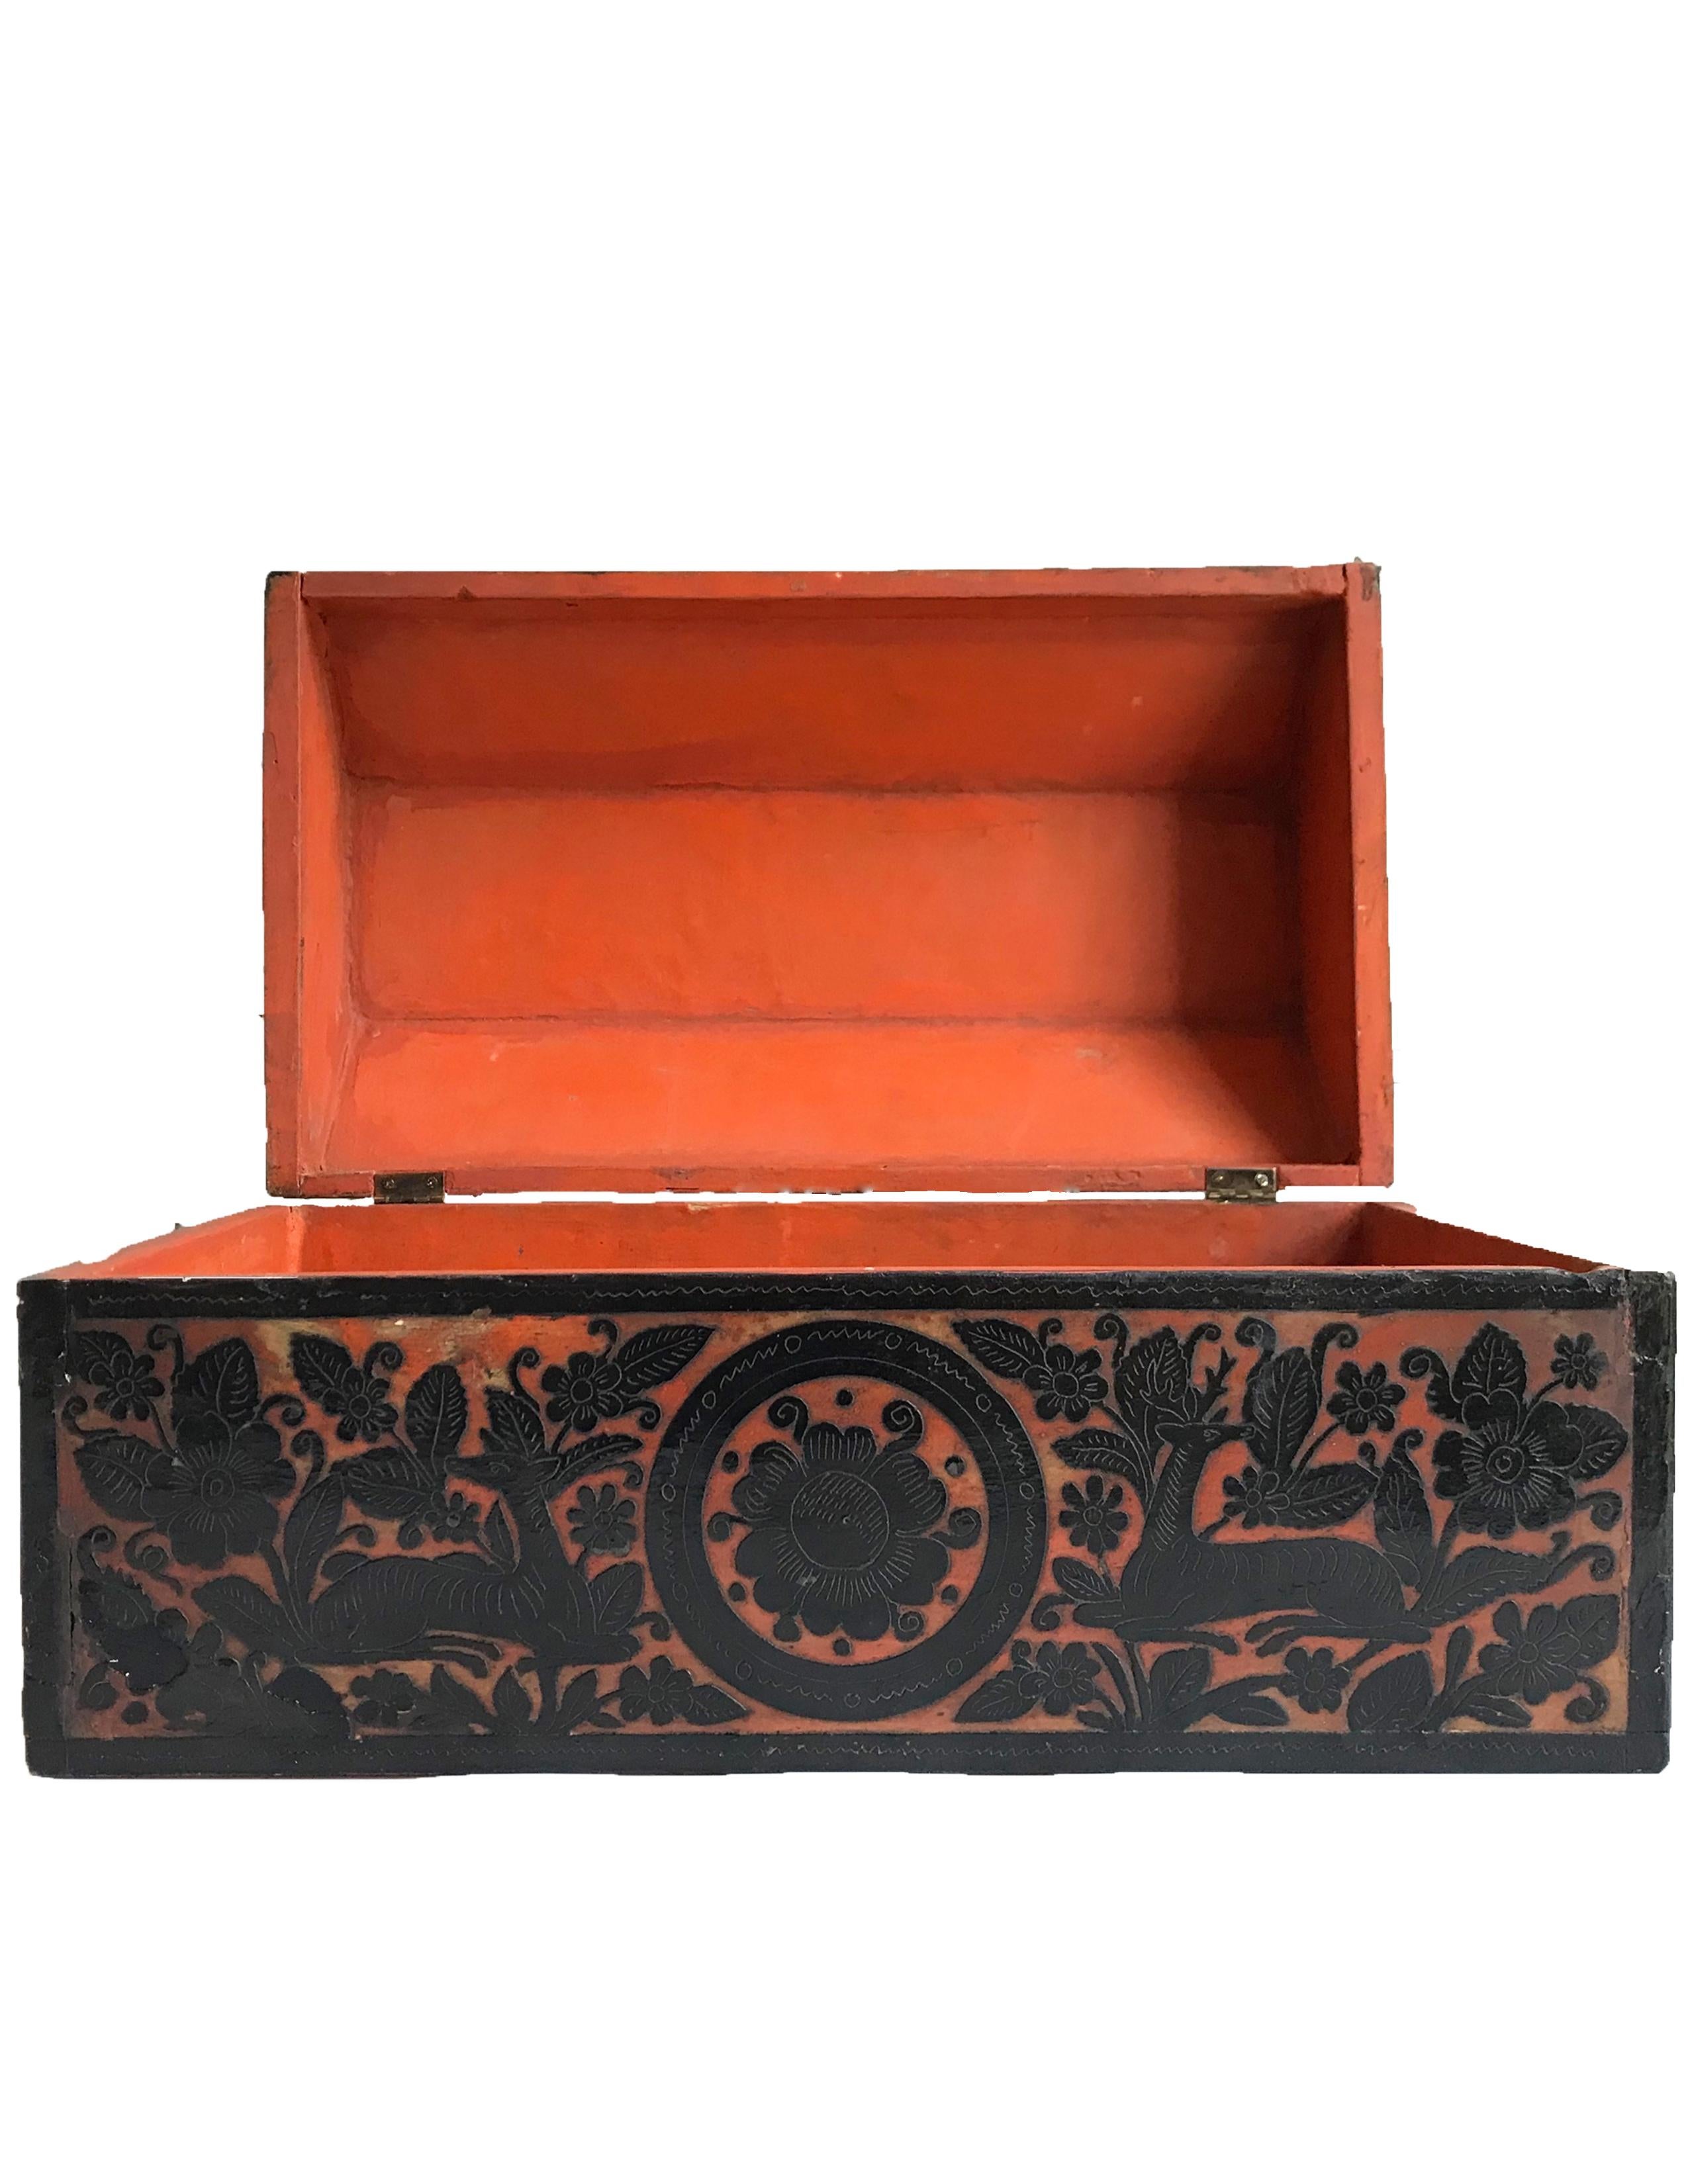 Hand-Carved Early 19th Century American Carved Lacquered Folk Art Wooden Box from Tennessee